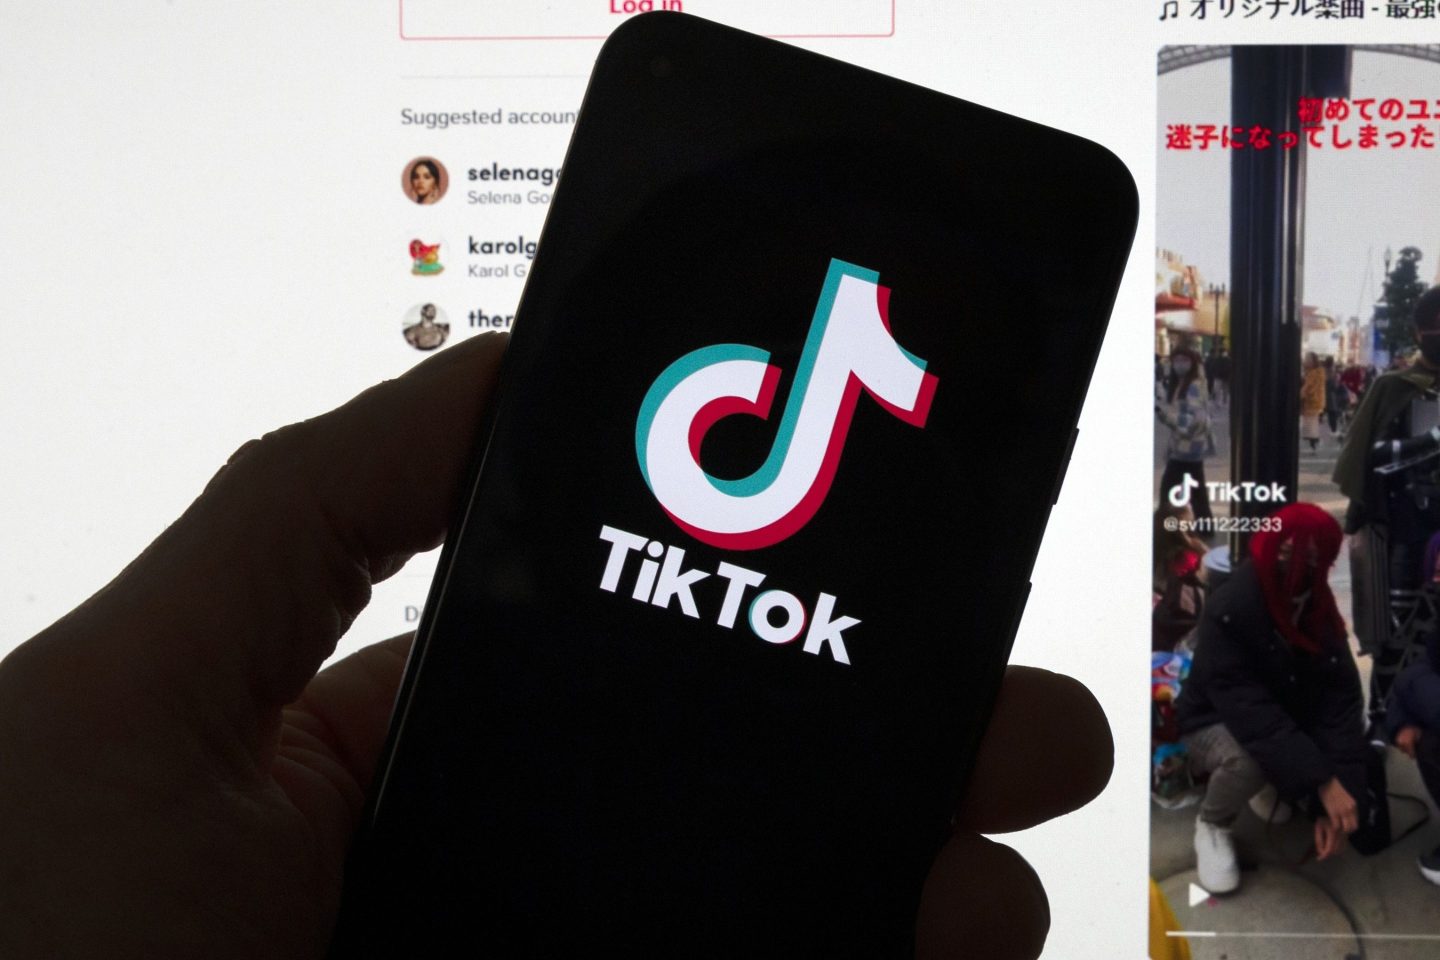 FILE &#8211; The TikTok logo is seen on a mobile phone in front of a computer screen which displays the TikTok home screen, March 18, 2023, in Boston. Social media platforms often rely on labels to let users know an account is operated by a Russian state propaganda agency. But new research shows that on TikTok at least, the labels aren&#8217;t very effective even when they&#8217;re applied consistently. (AP Photo/Michael Dwyer, File)